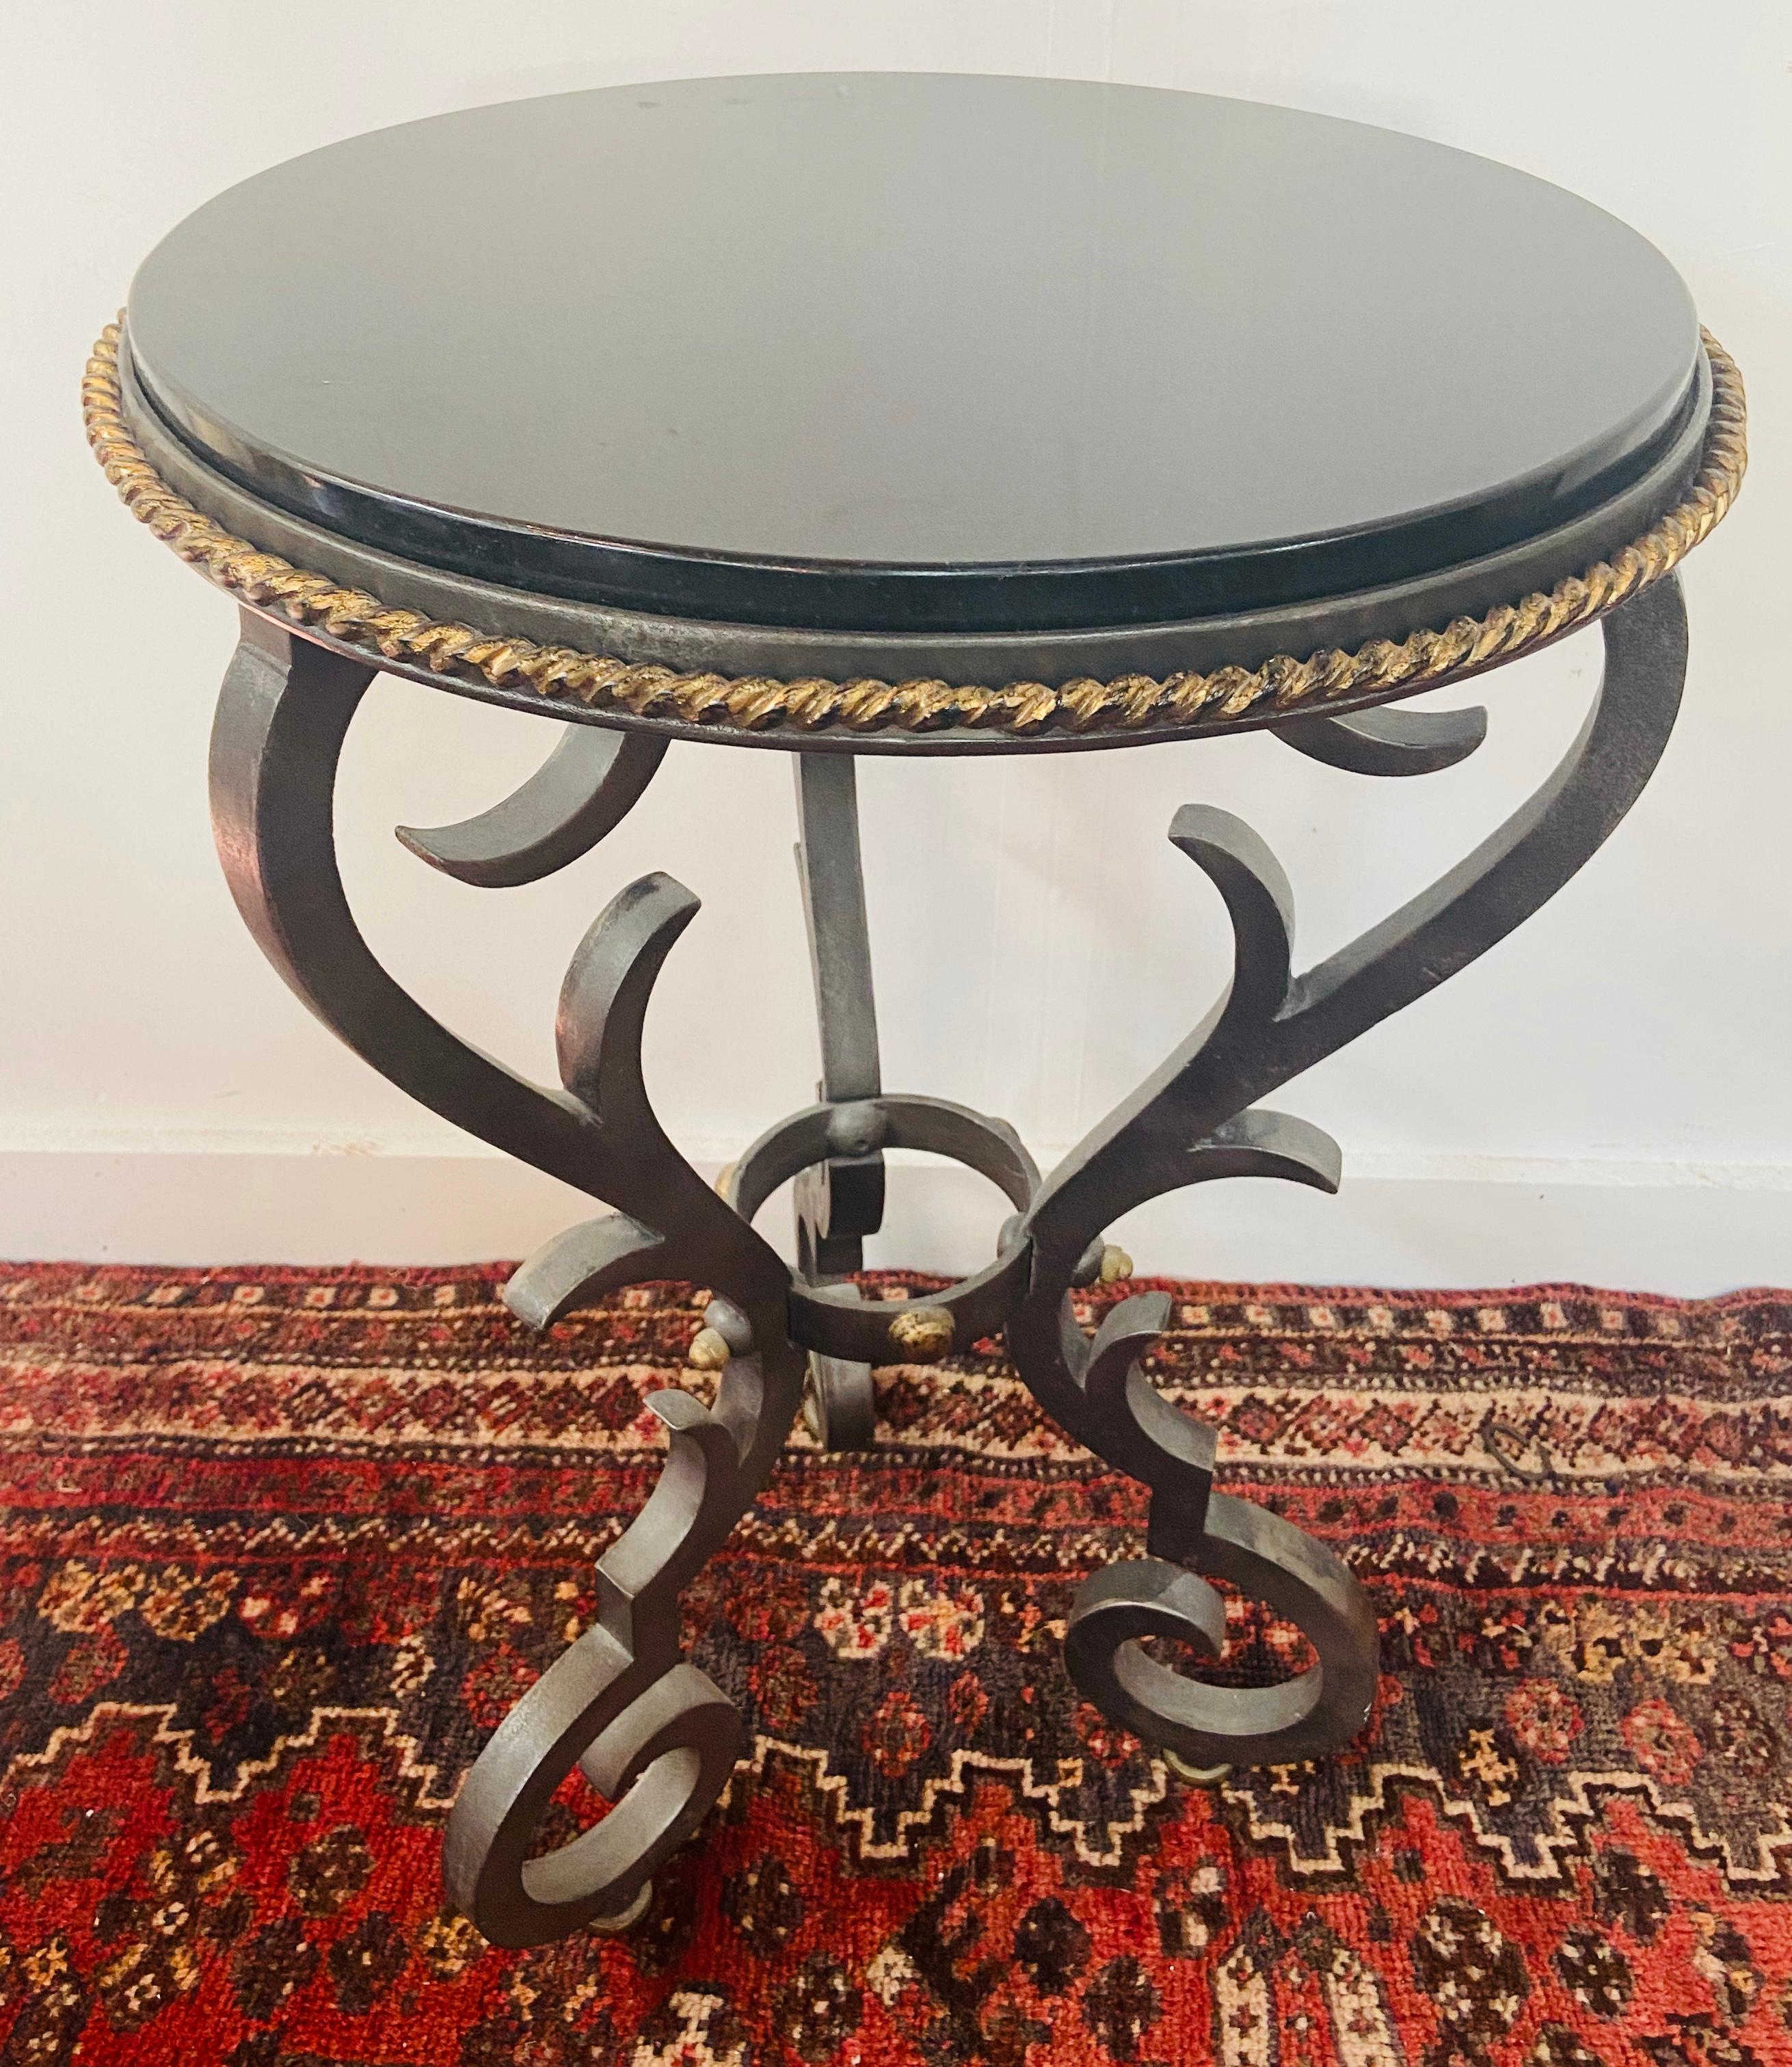 A charming cast iron gueridon table in French Provincial style. With a gold painted rope design frame the circular marble top is sitting on an iron cast base with scroll base. 

Dimensions: 28